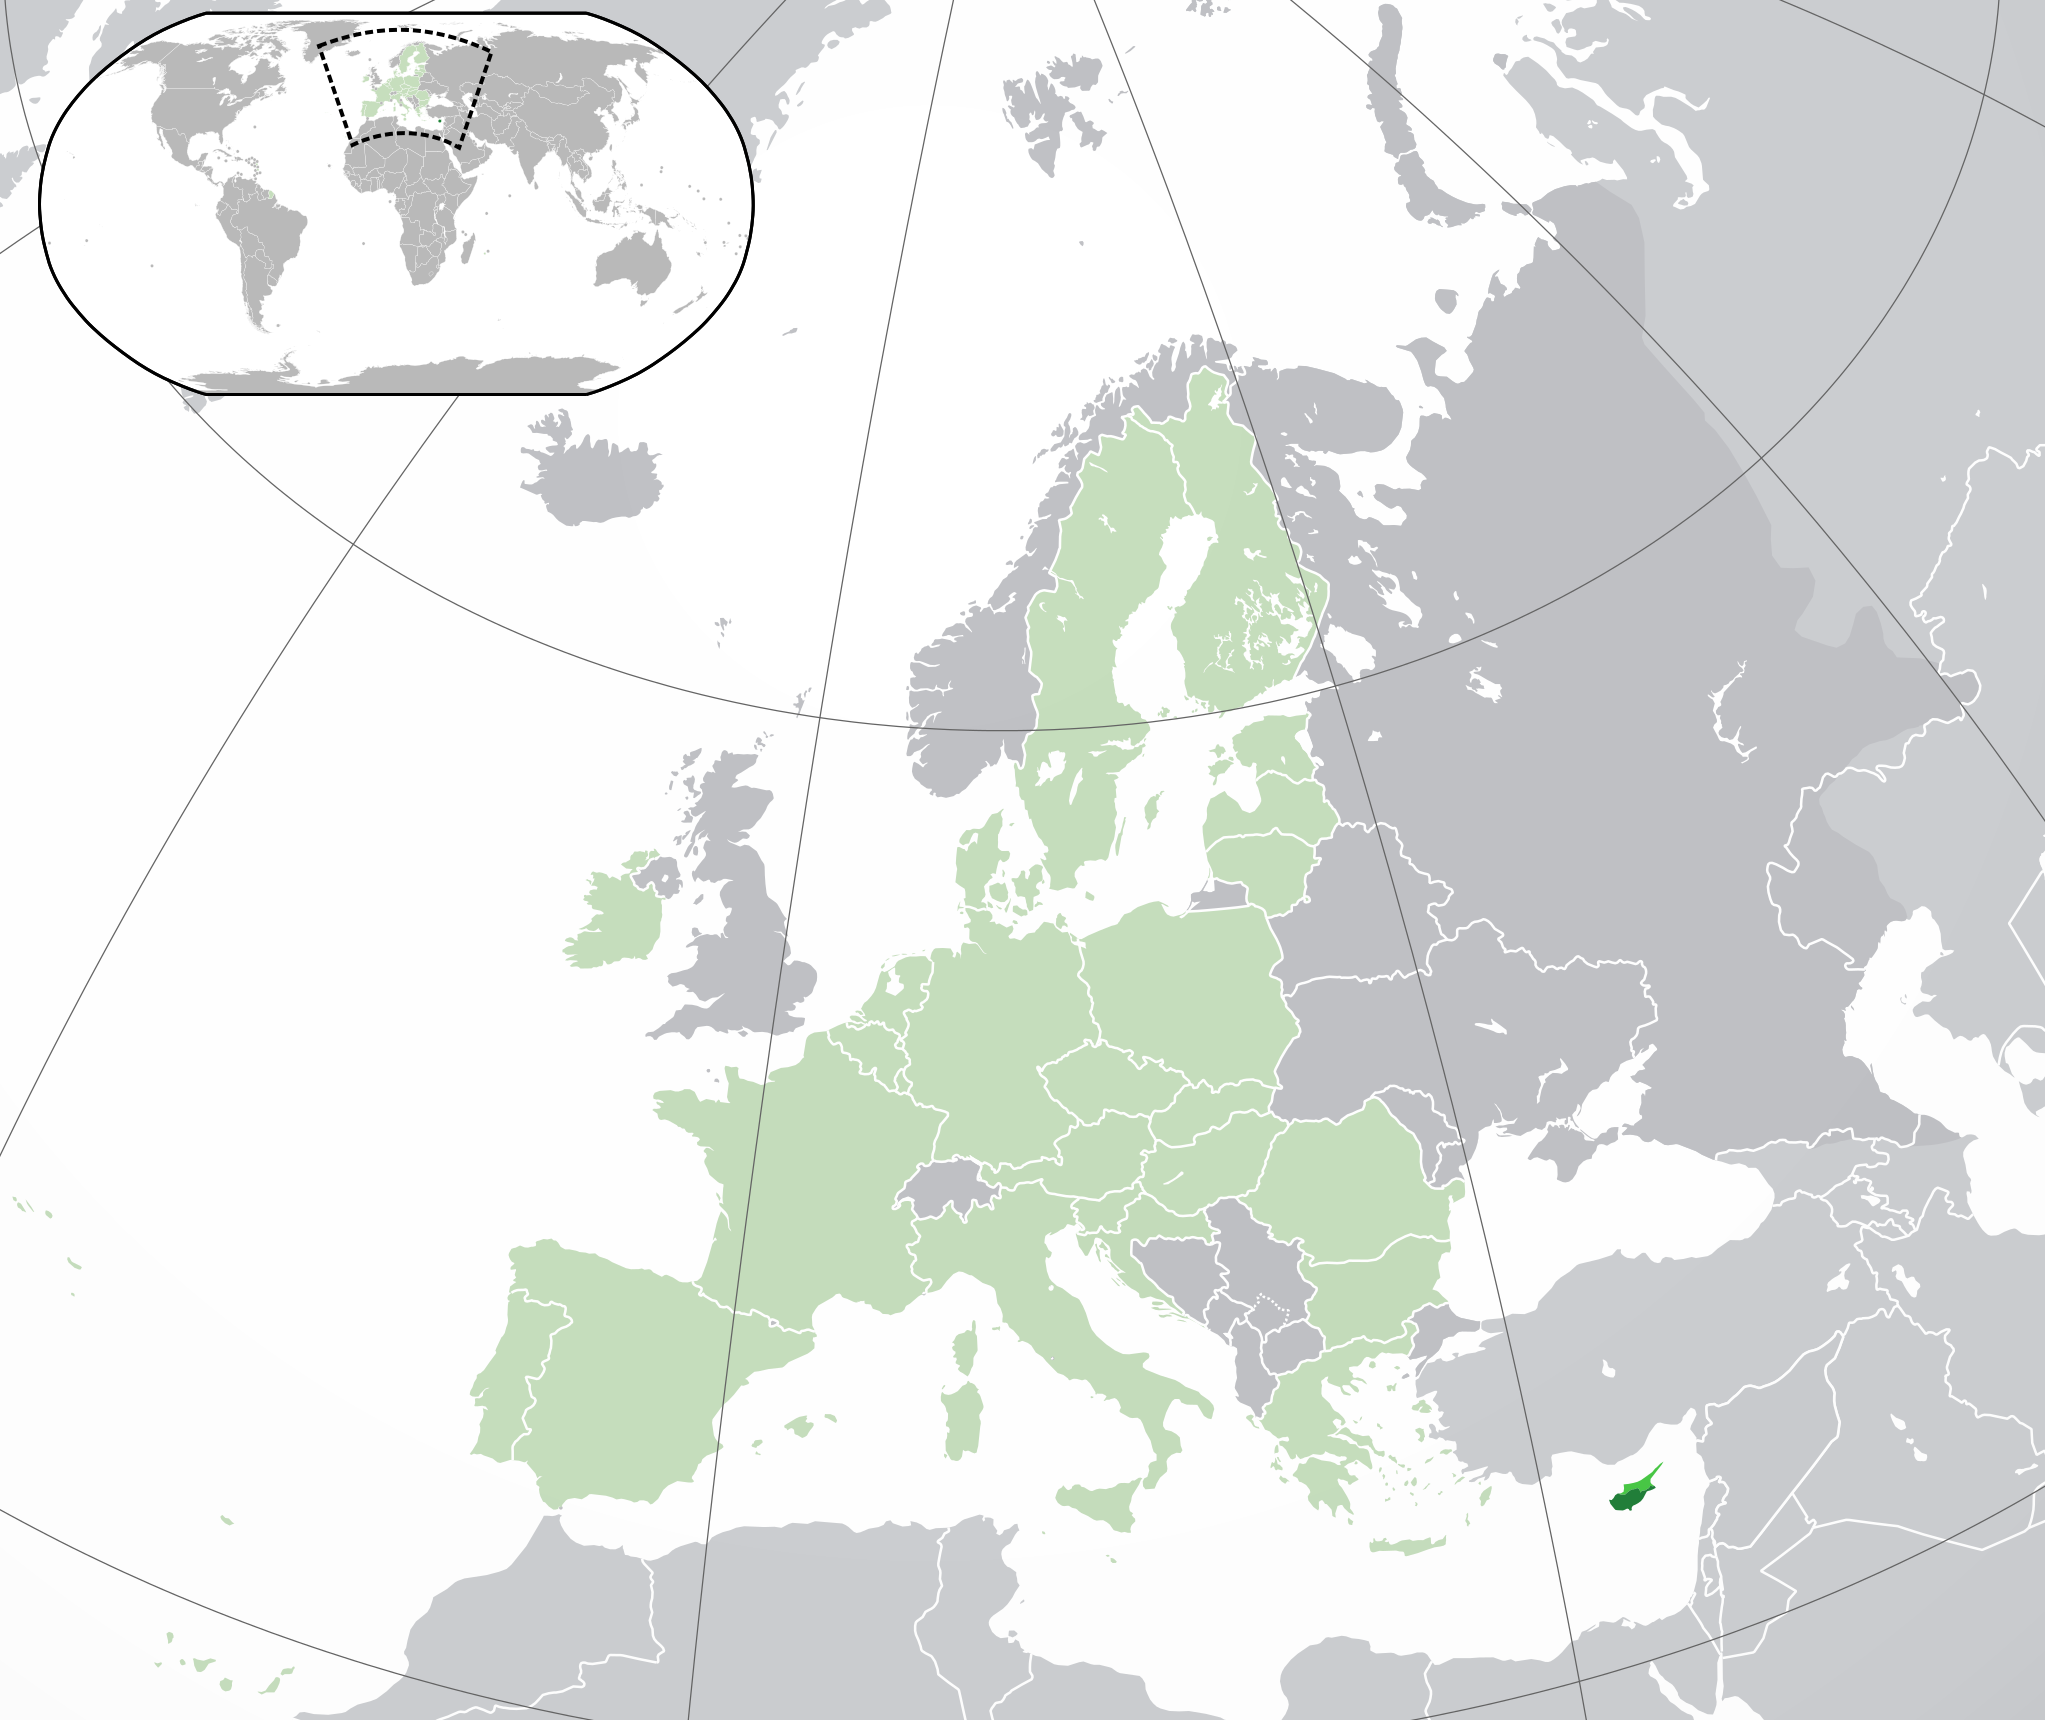 Republic of Cyprus in dark green, Northern Cyprus, in medium green, and the European Union in light green